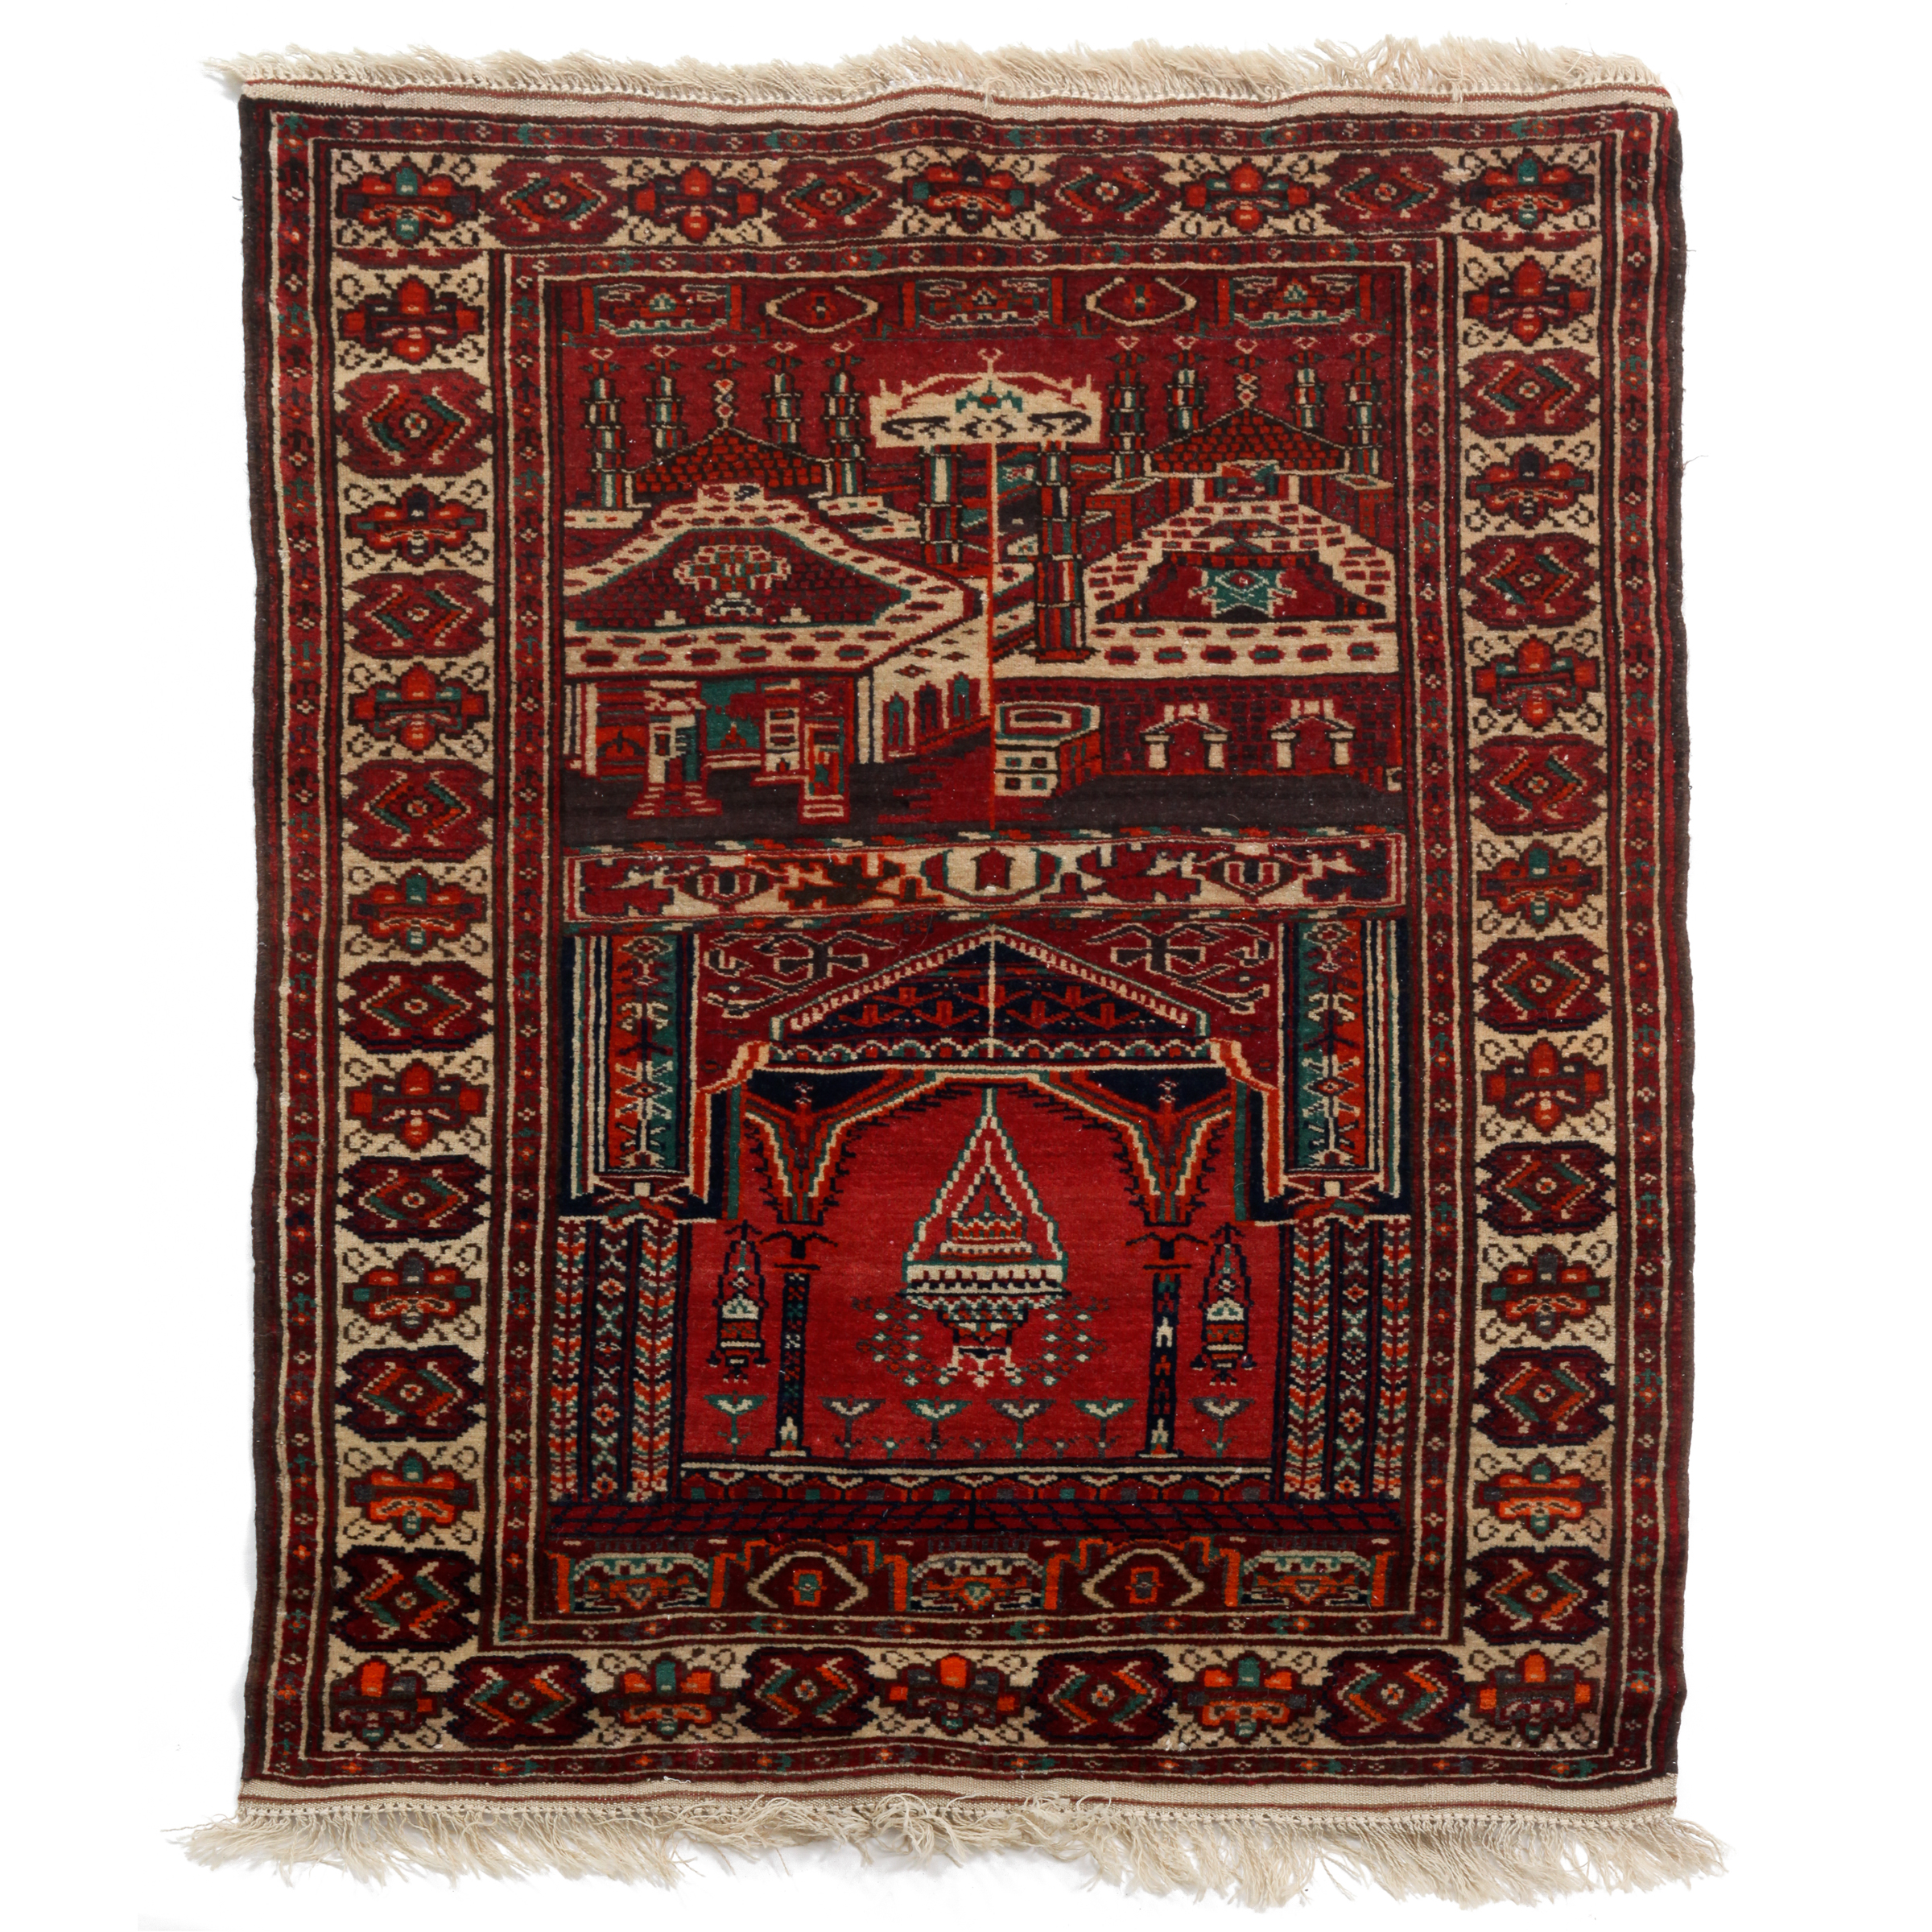 Turkoman Prayer Rug, Central Asia, mid to late 20th century